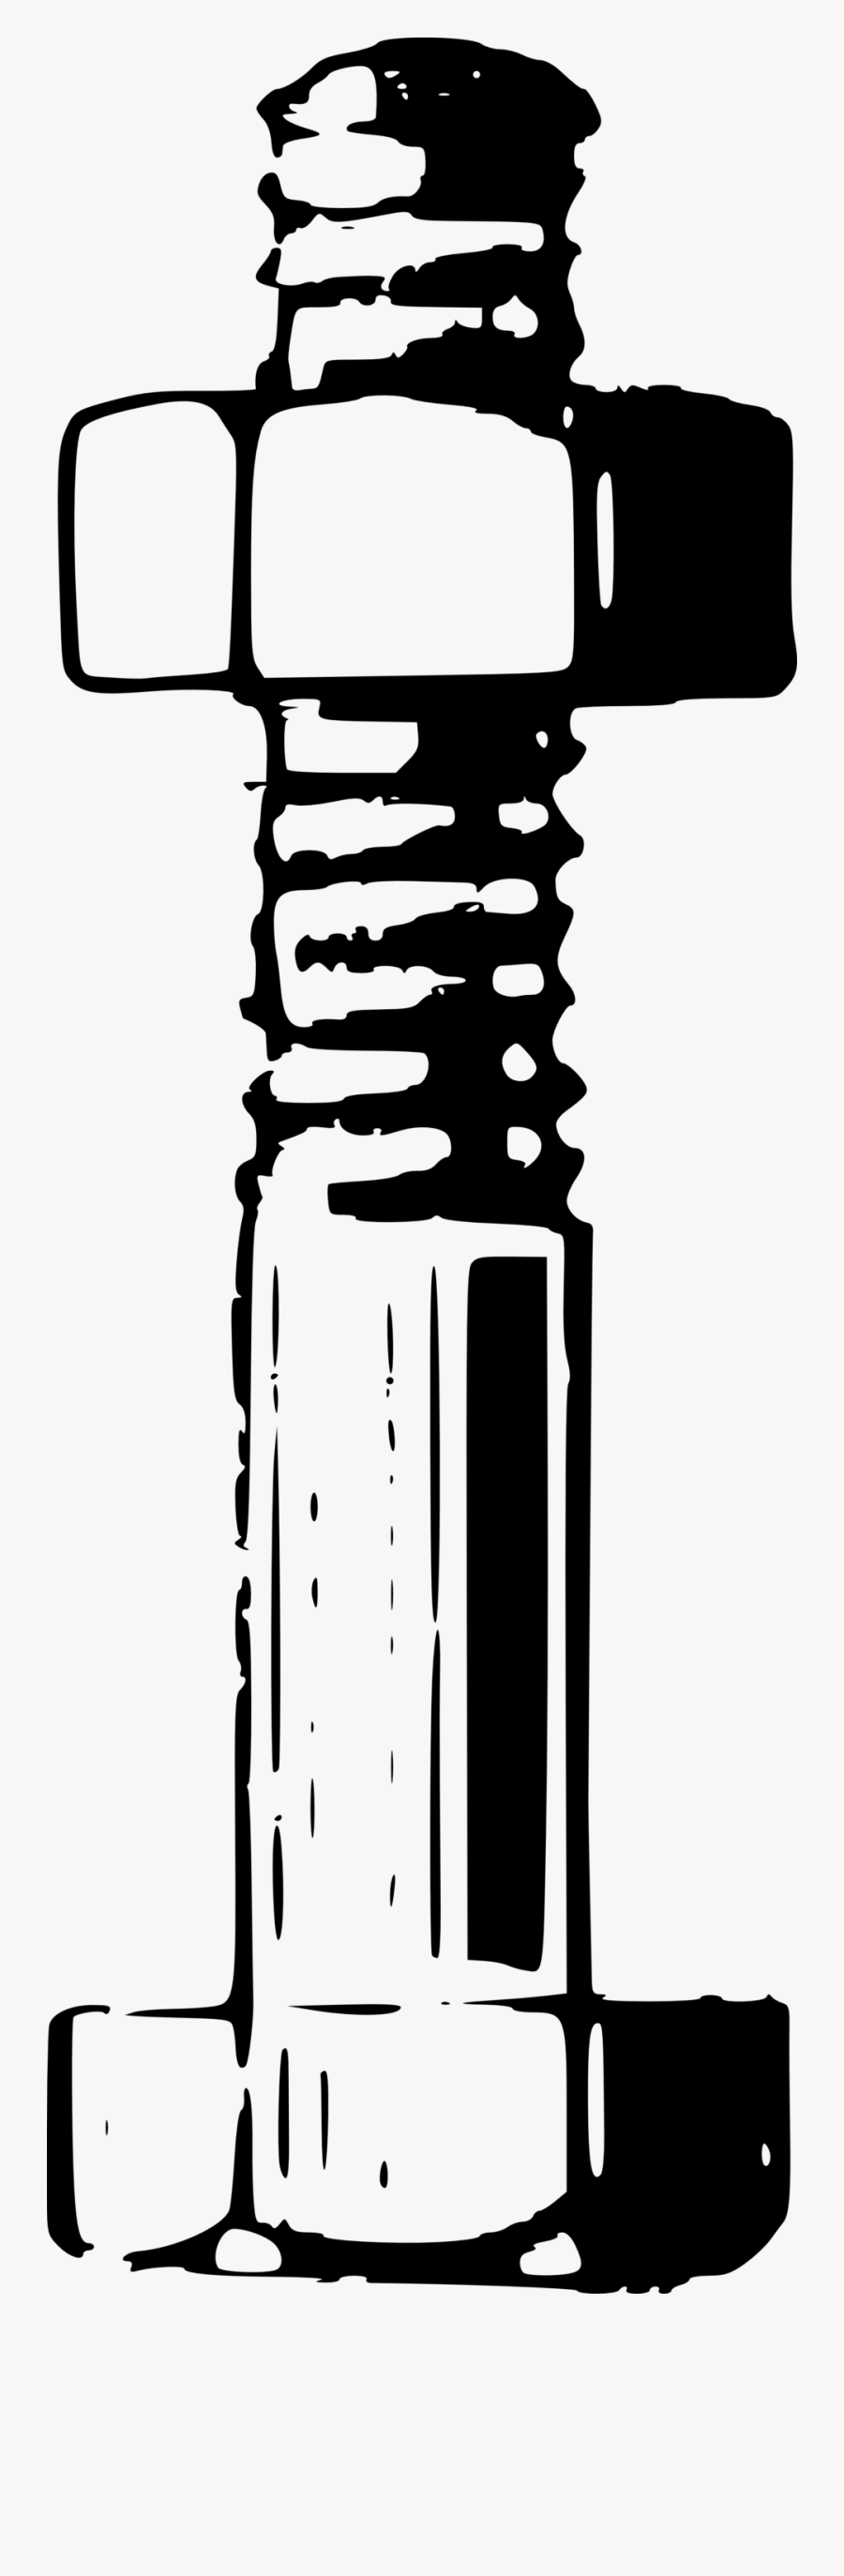 Bolts And Nuts Black And White Silhouette, Transparent Clipart